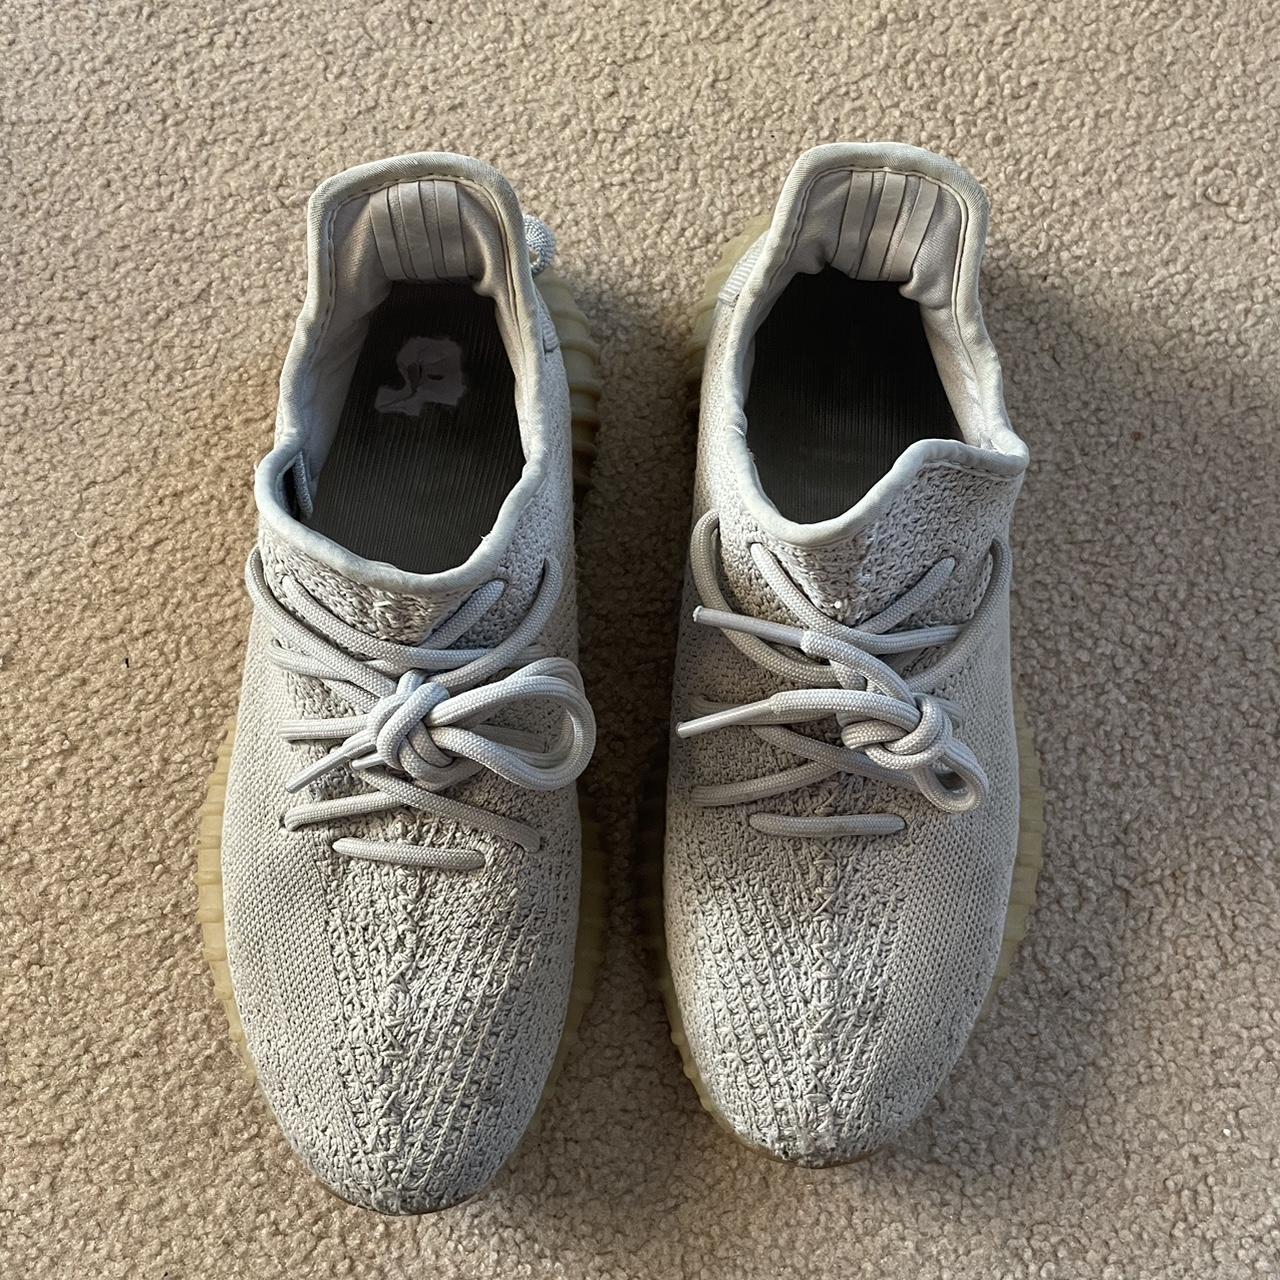 Yeezy Men's Tan and White Trainers (4)